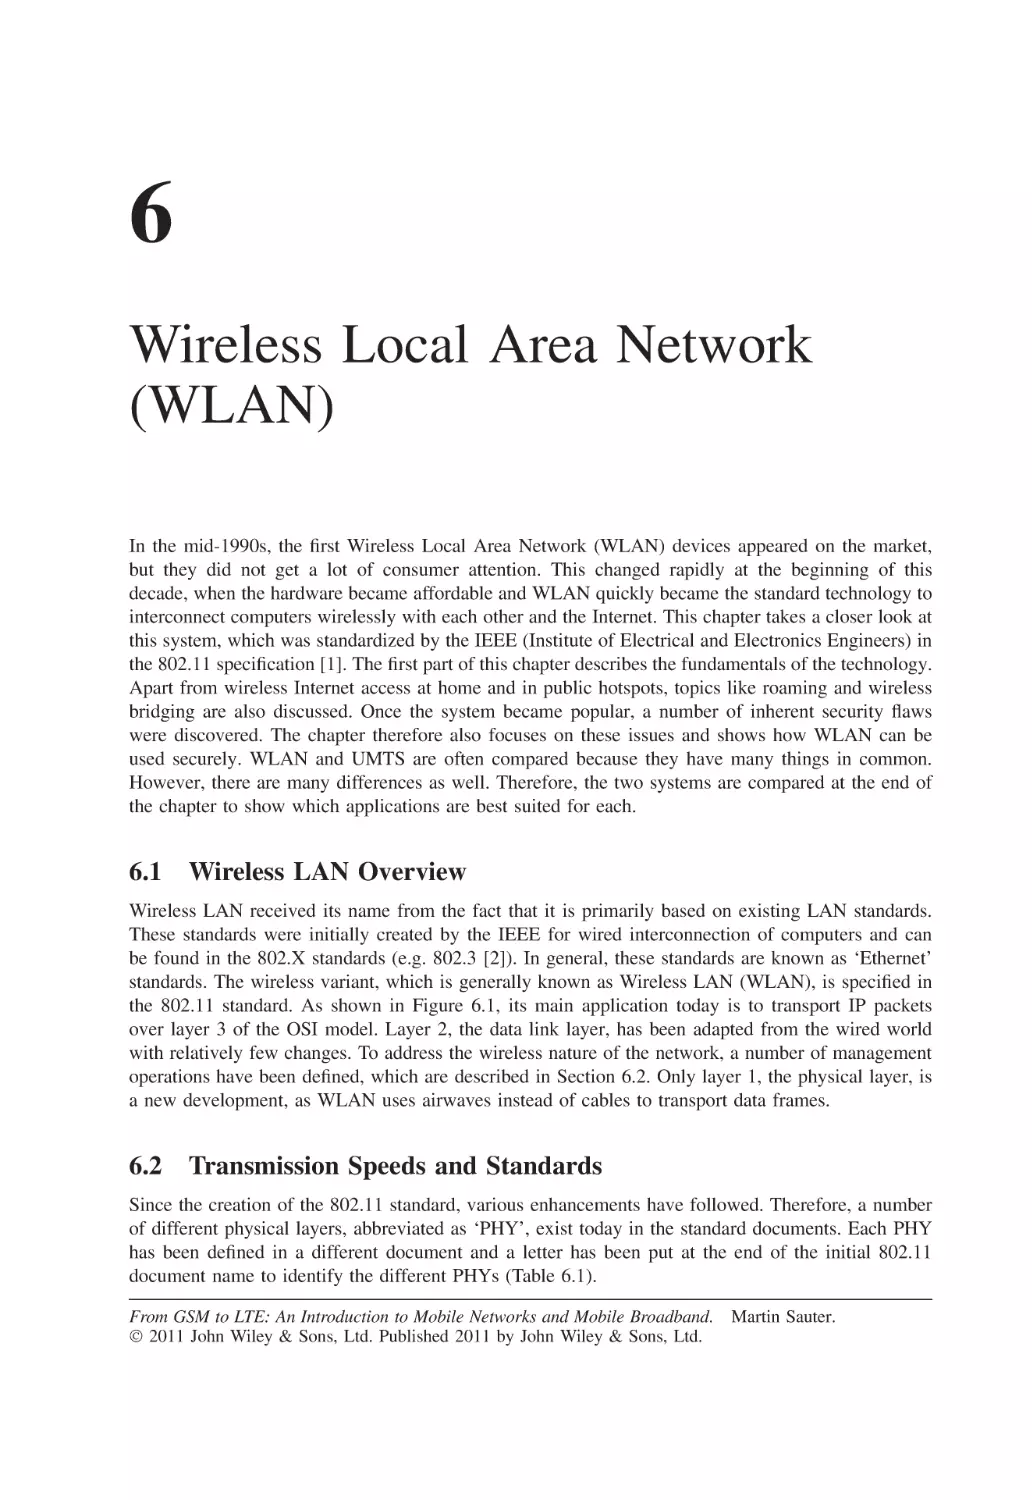 6 Wireless Local Area Network (WLAN)
6.1 Wireless LAN Overview
6.2 Transmission Speeds and Standards